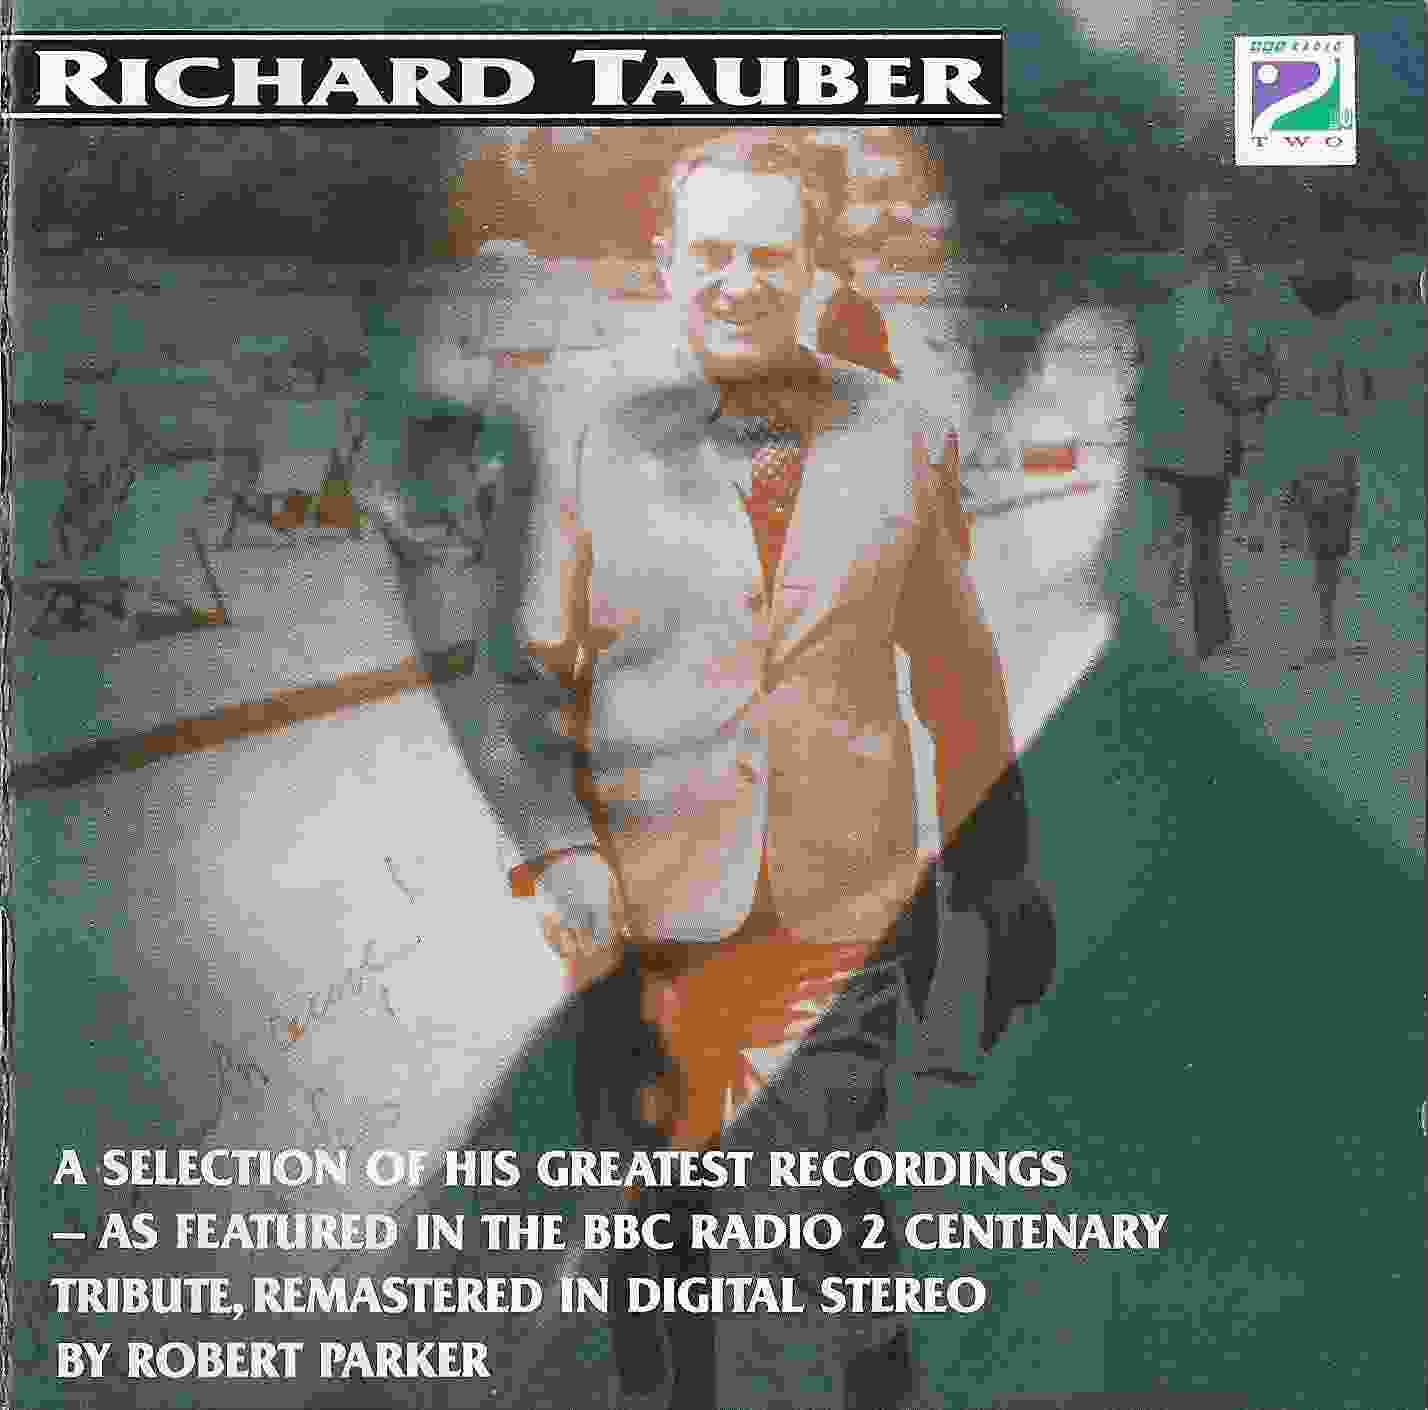 Picture of RPCD 858 Richard Tauber  A selection of his greatest recordings by artist Richard Tauber from the BBC cds - Records and Tapes library